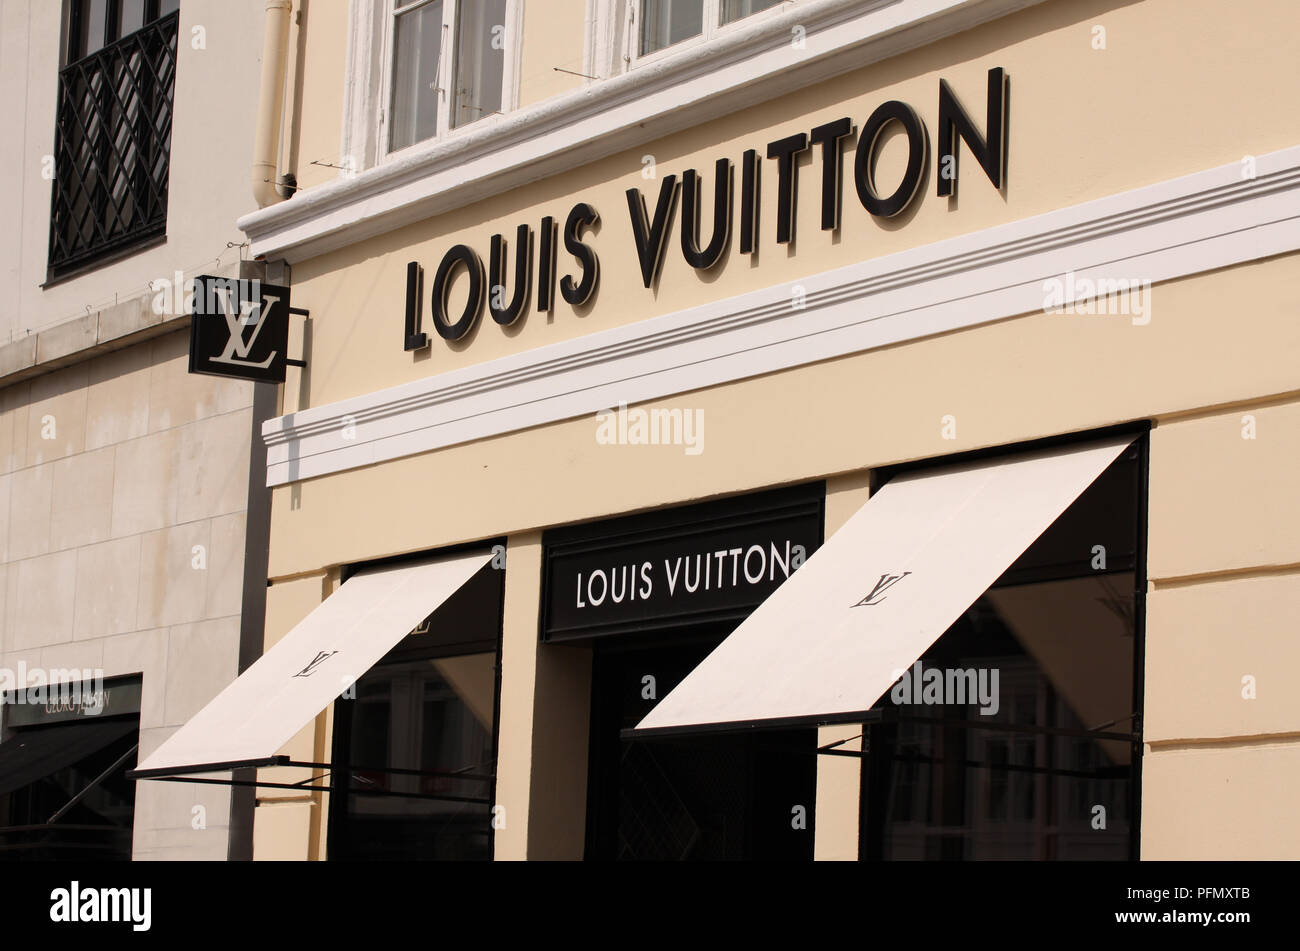 Louis vuitton logo editorial image. Illustration of contract